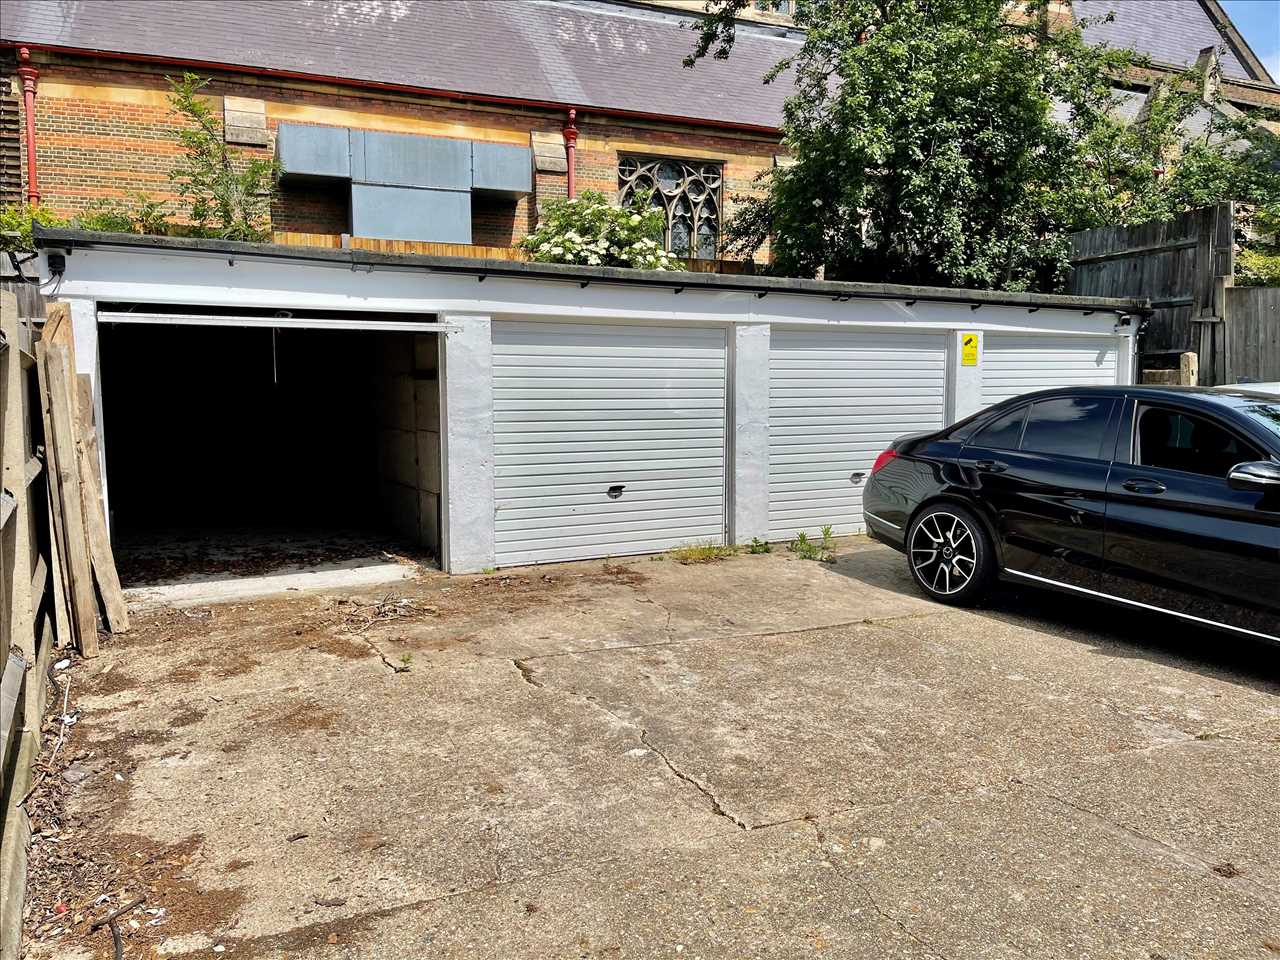 A rare opportunity to acquire a garage on a long lease at the rear of a small low rise purpose built block situated in a sought after location within close proximity to Tufnell Park (Northern Line) underground station as well as the open space of Parliament Hill Fields and the fashionable ...